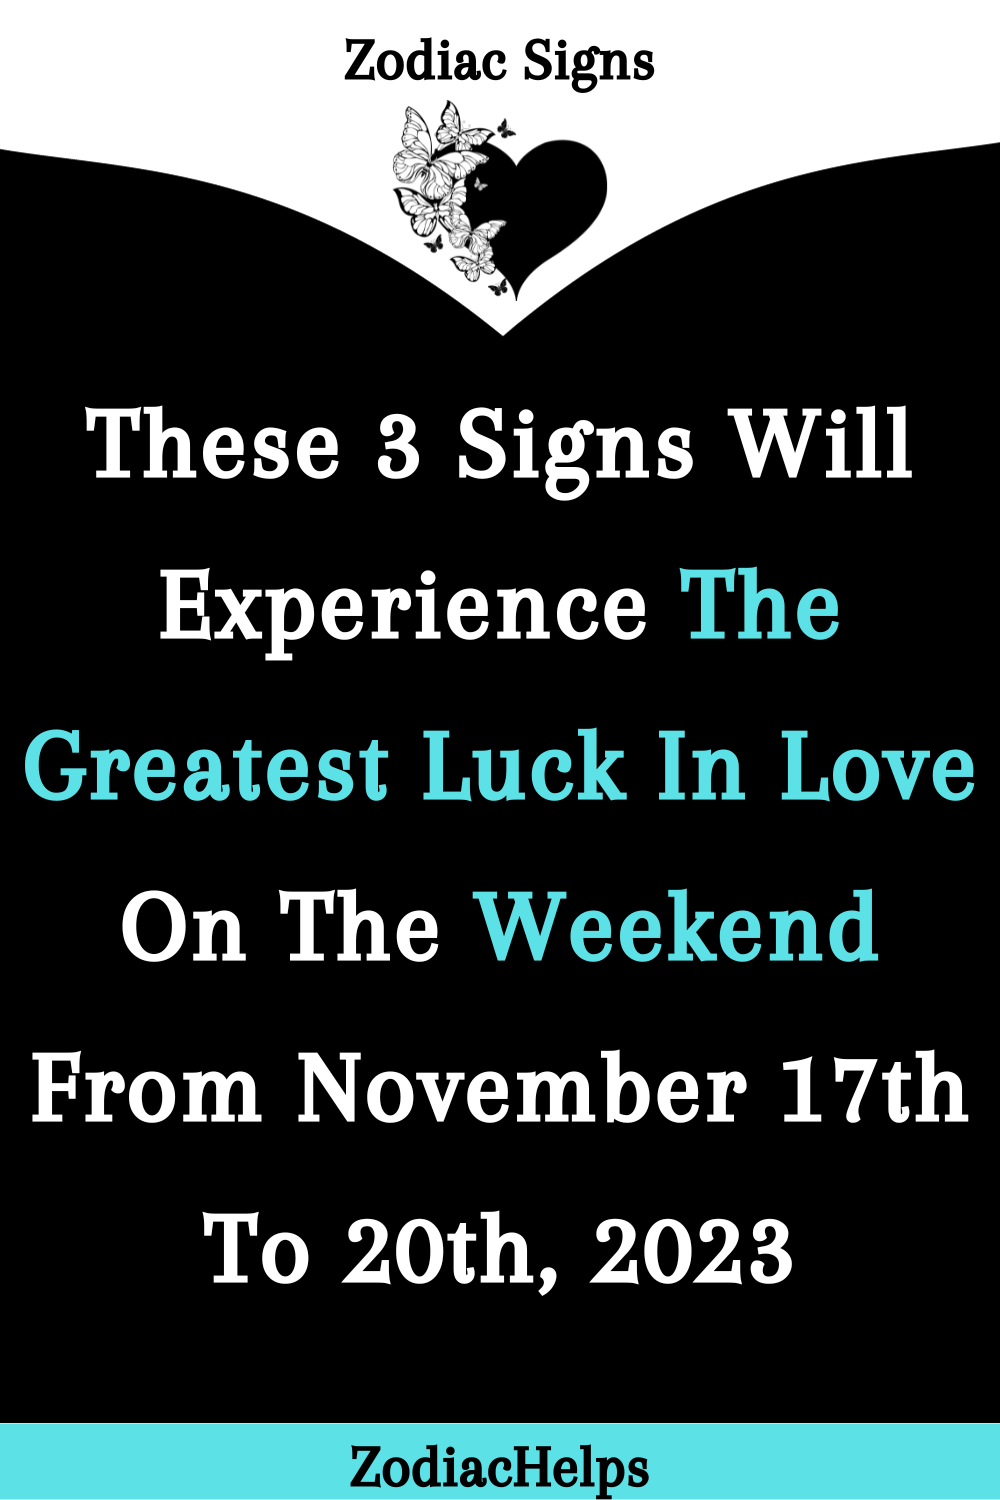 These 3 Signs Will Experience The Greatest Luck In Love On The Weekend From November 17th To 20th, 2023